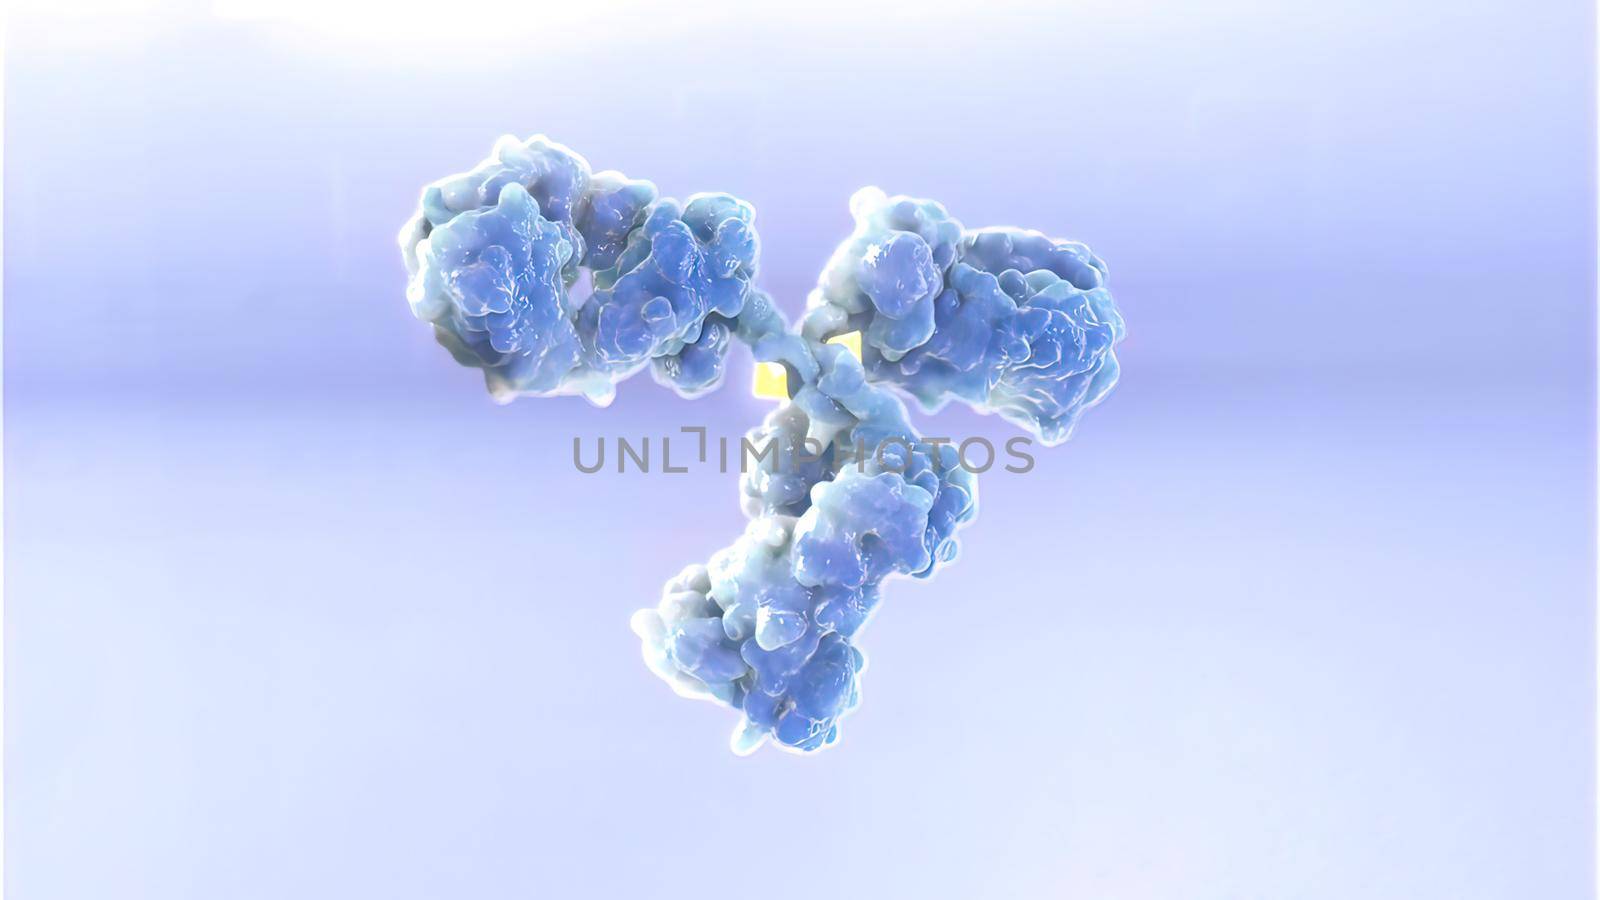 Antibodies are a part of your immune system. They fight germs, but sometimes they make a mistake and target your body's healthy cells instead. 3D Render